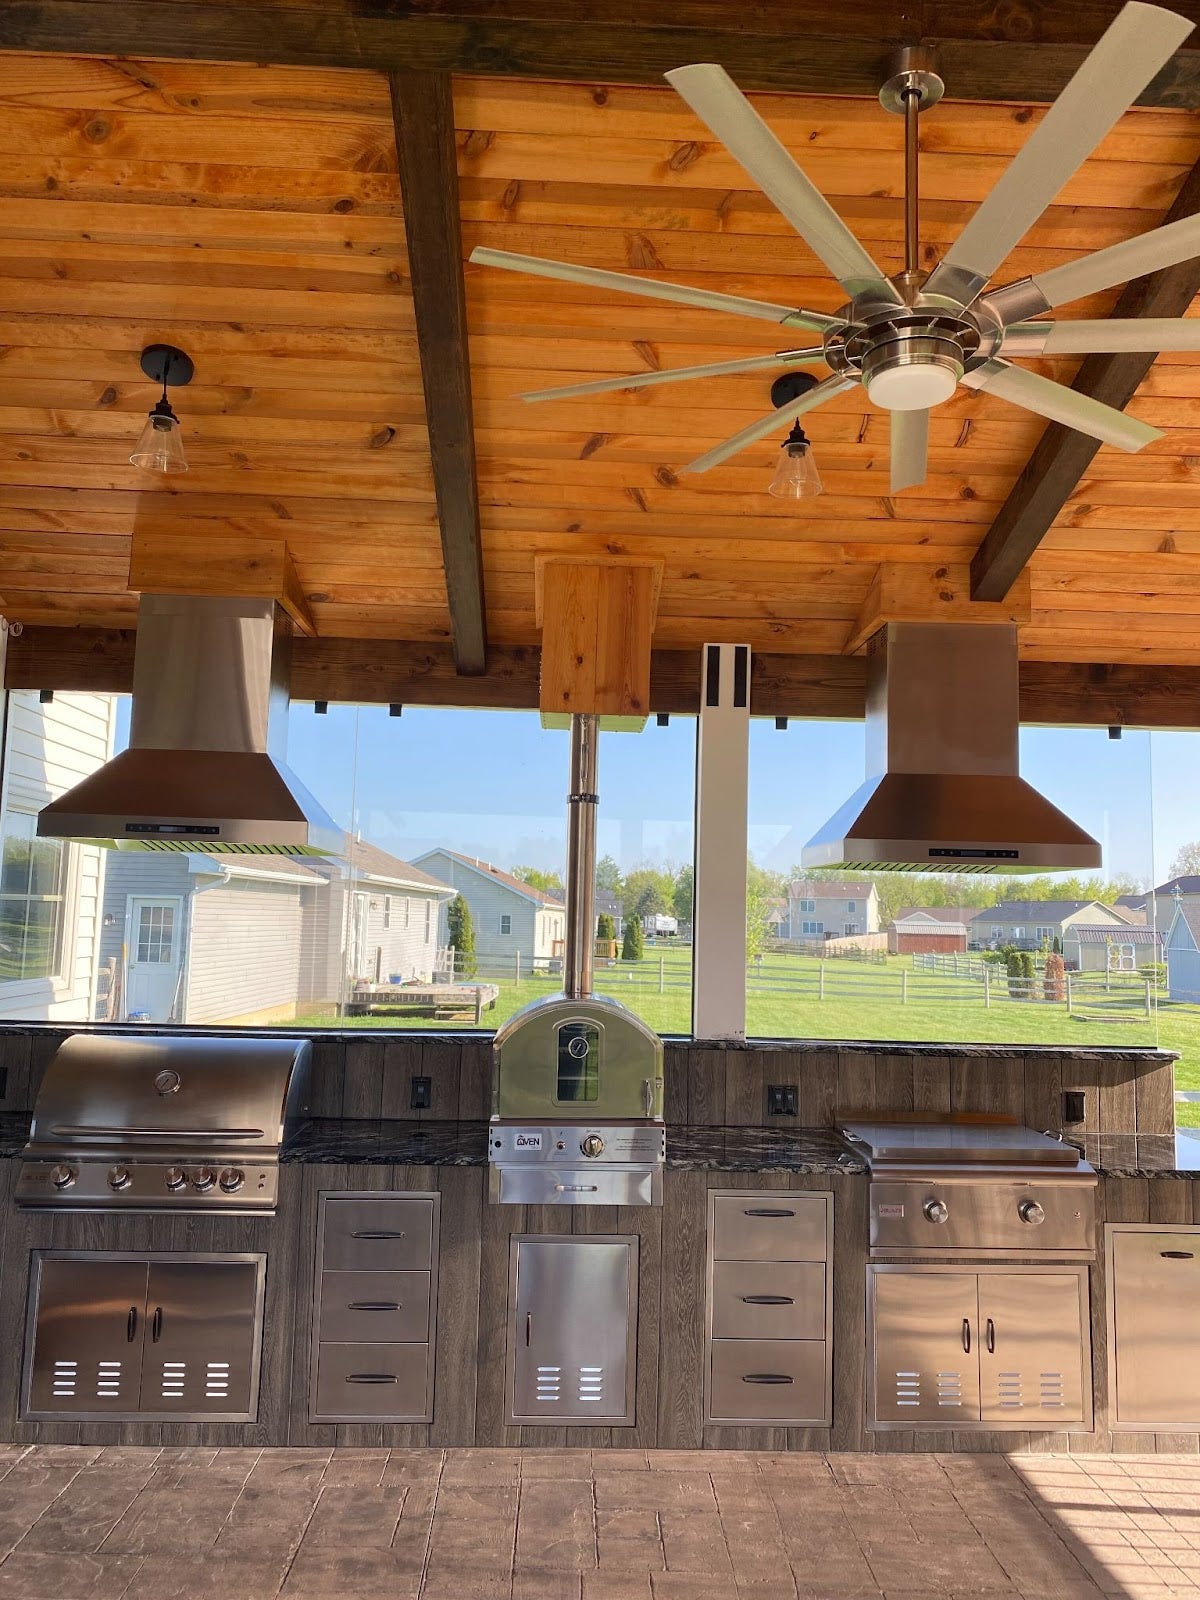 Spacious outdoor kitchen with stainless steel appliances, Proline range hoods, wooden cabinets, and a large ceiling fan, set against a suburban landscape. - Proline Range Hoods - prolinerangehoods.com 